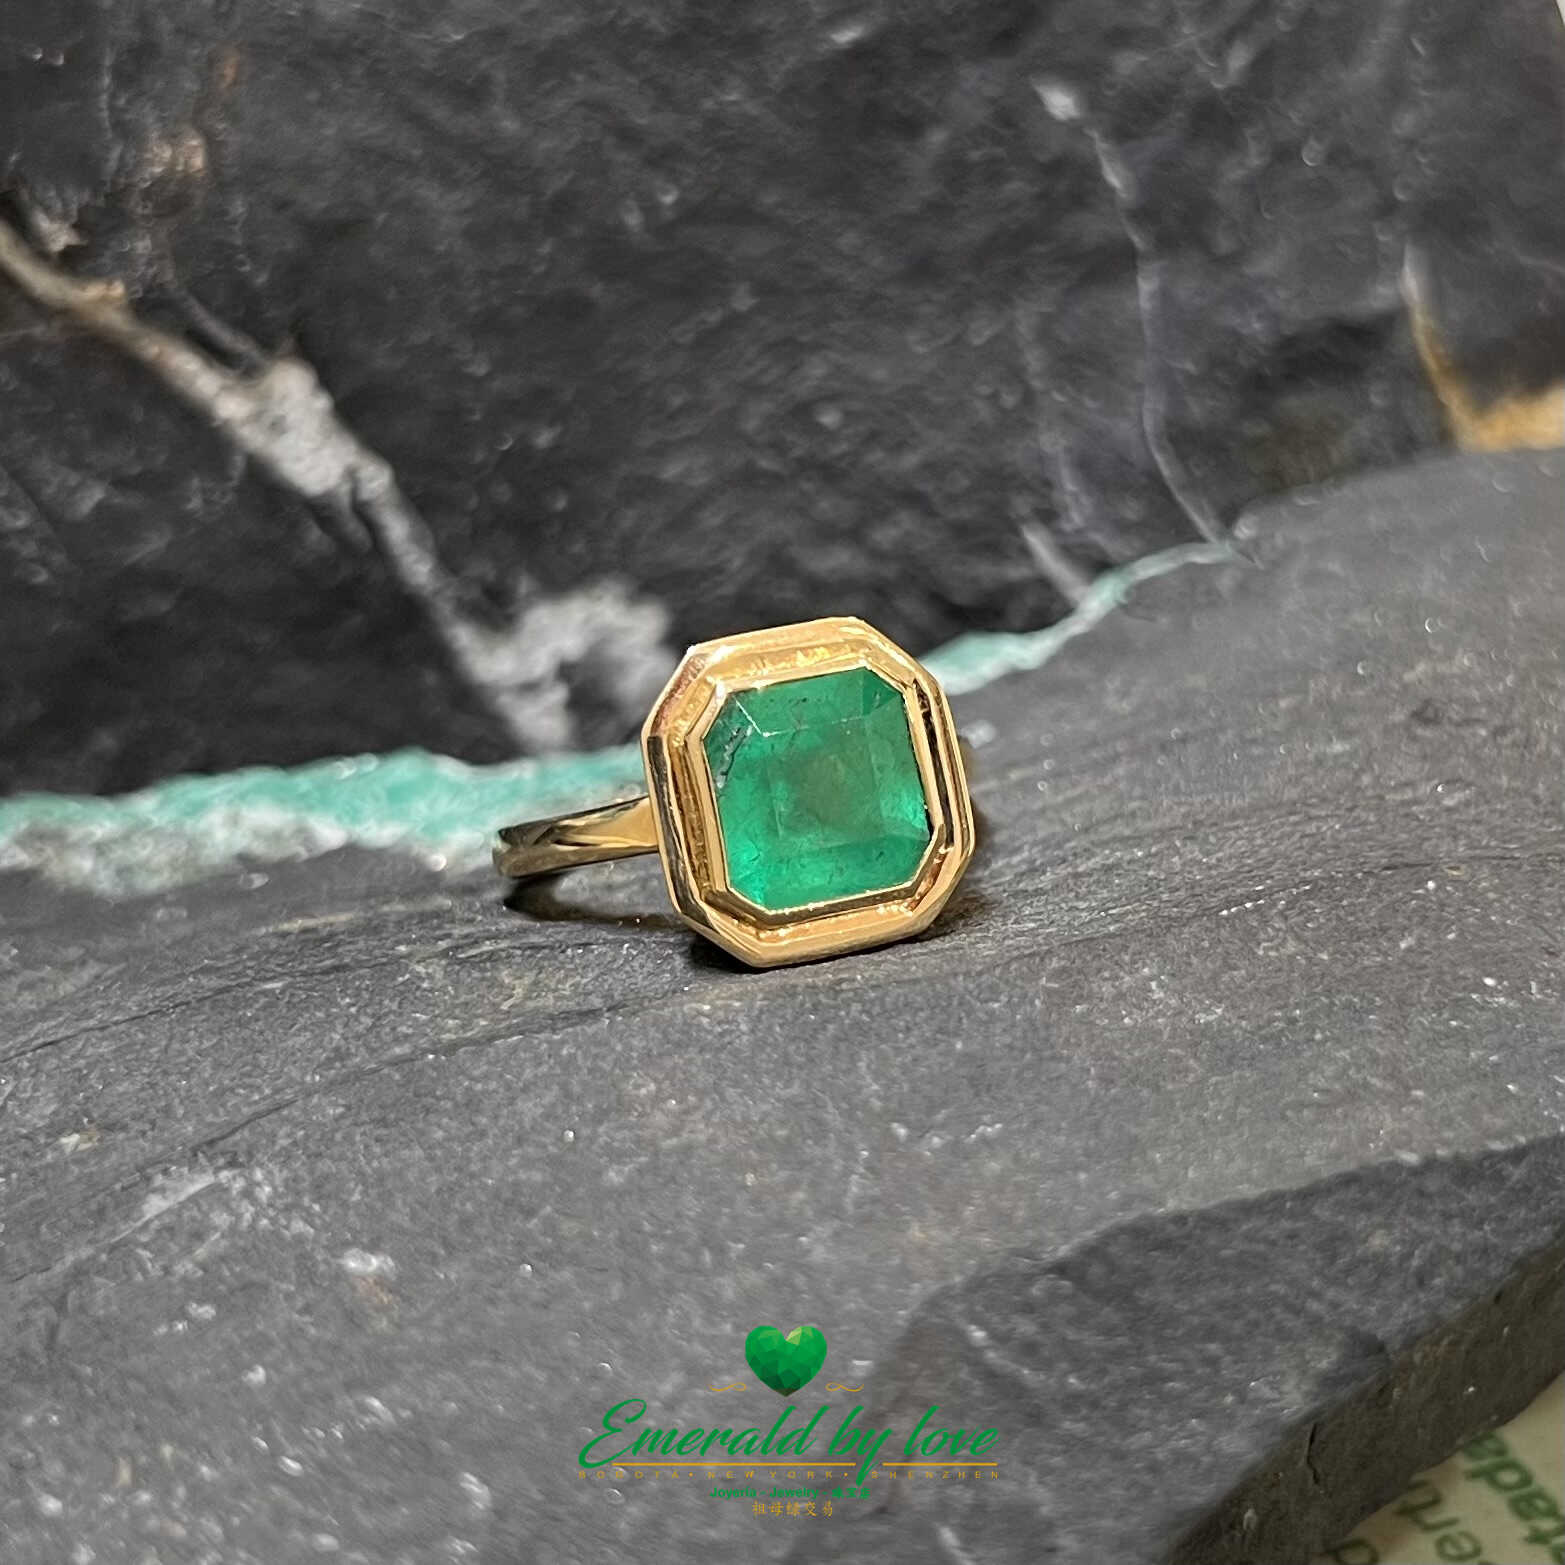 Bold Yellow Gold Ring with Square-Cut Emerald in Bezel Setting